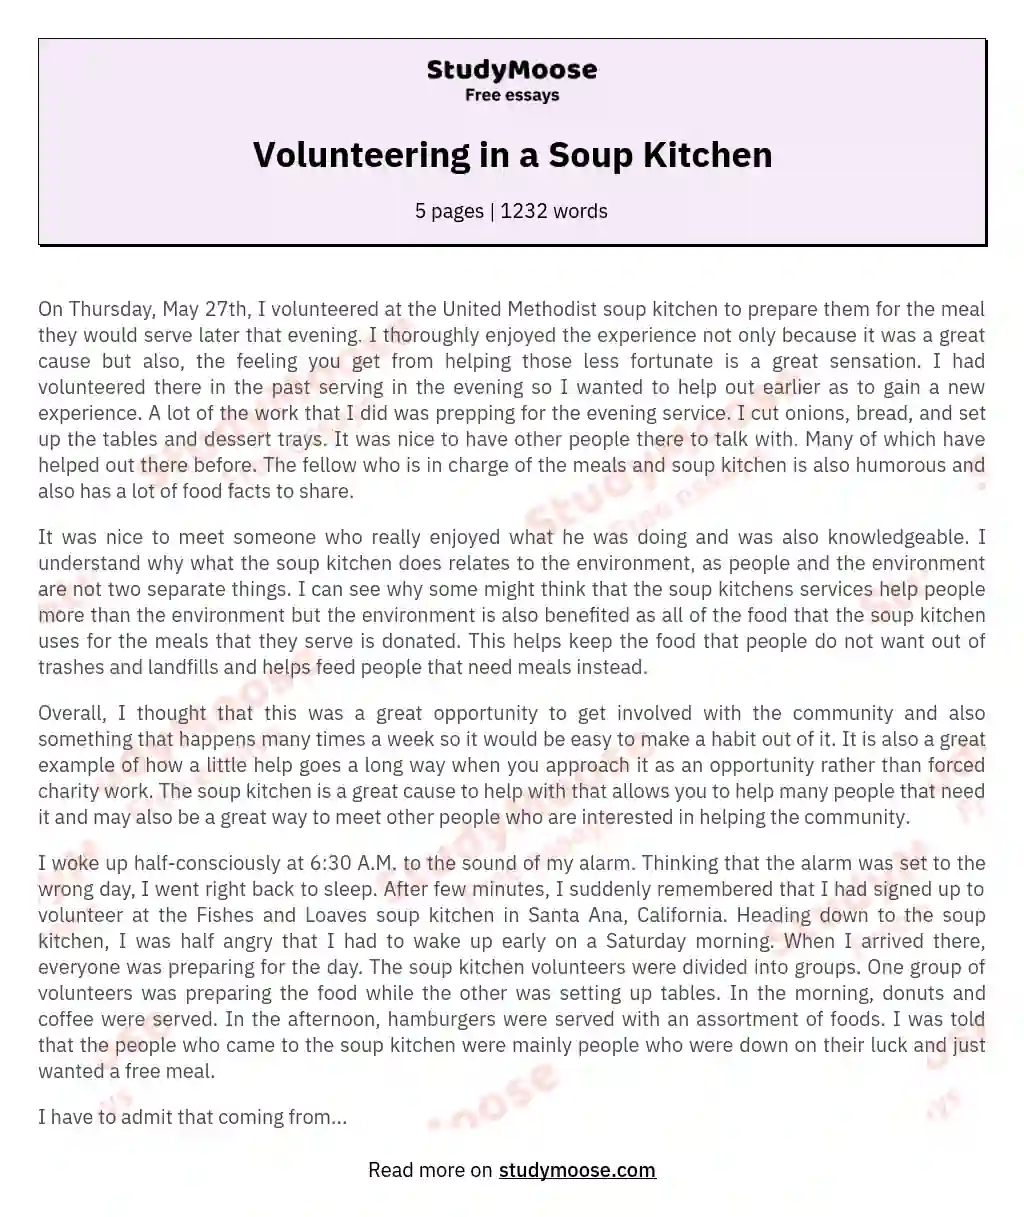 Volunteering in a Soup Kitchen